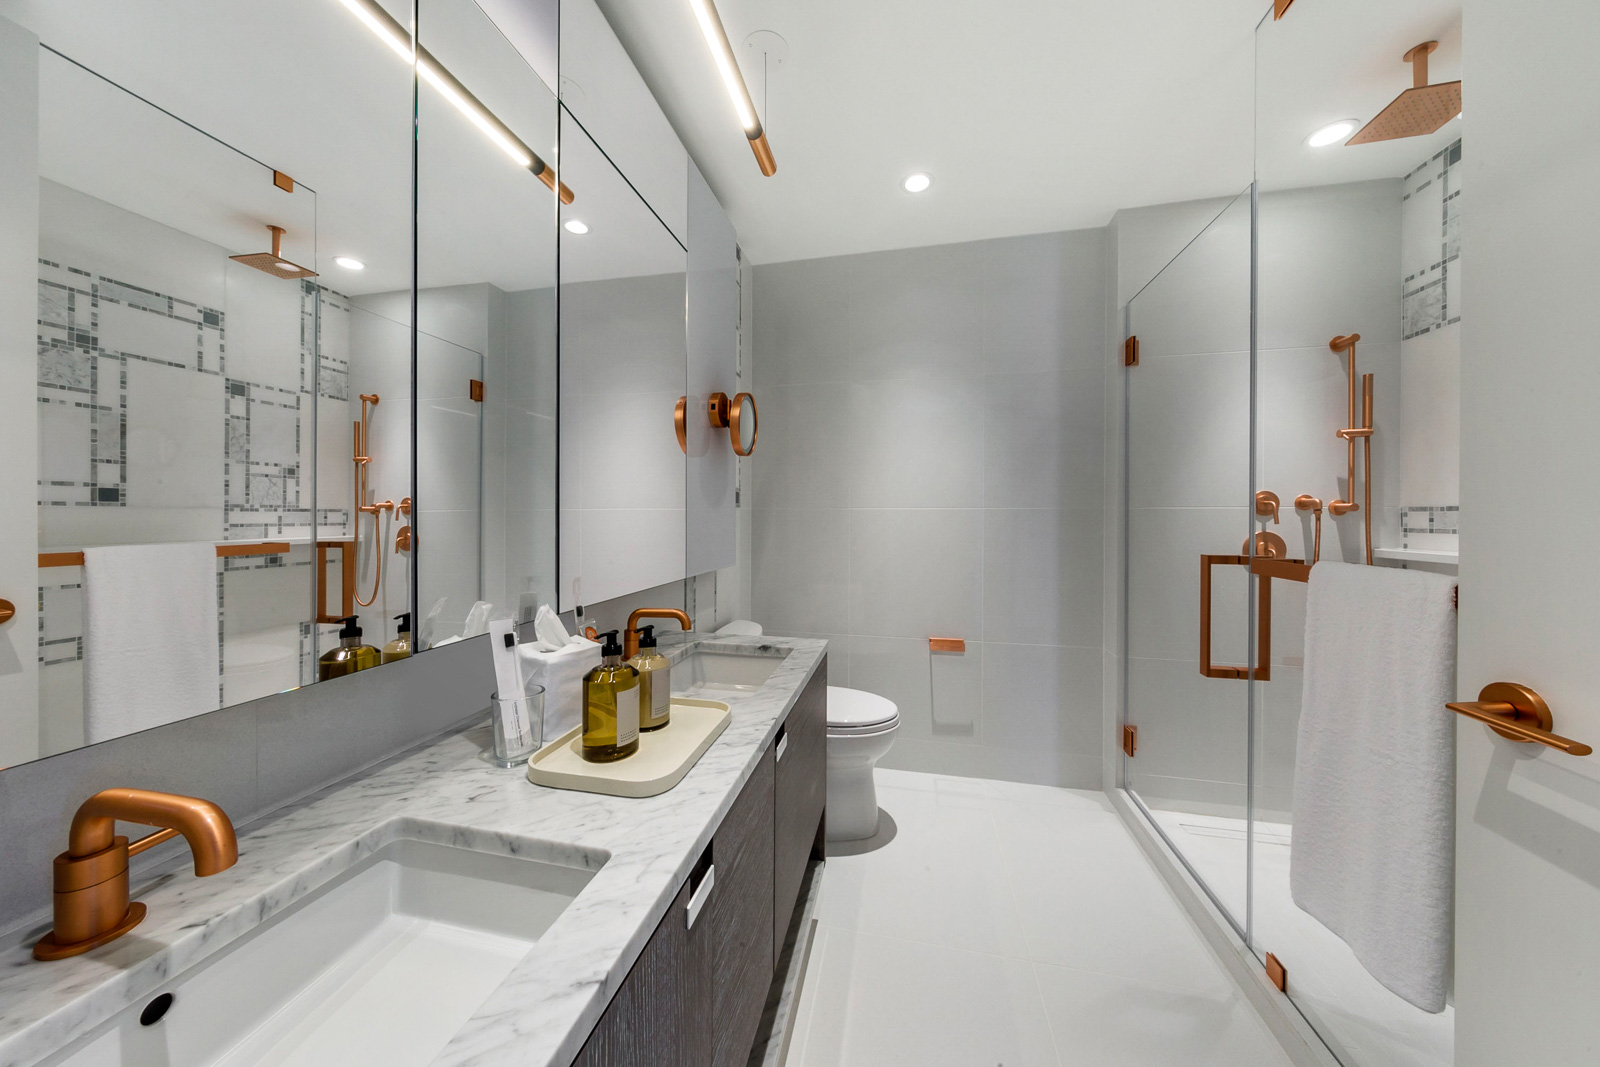 Interior view of Brooklyn Point residence master bathroom. Has marble counters and showers with gold trim.